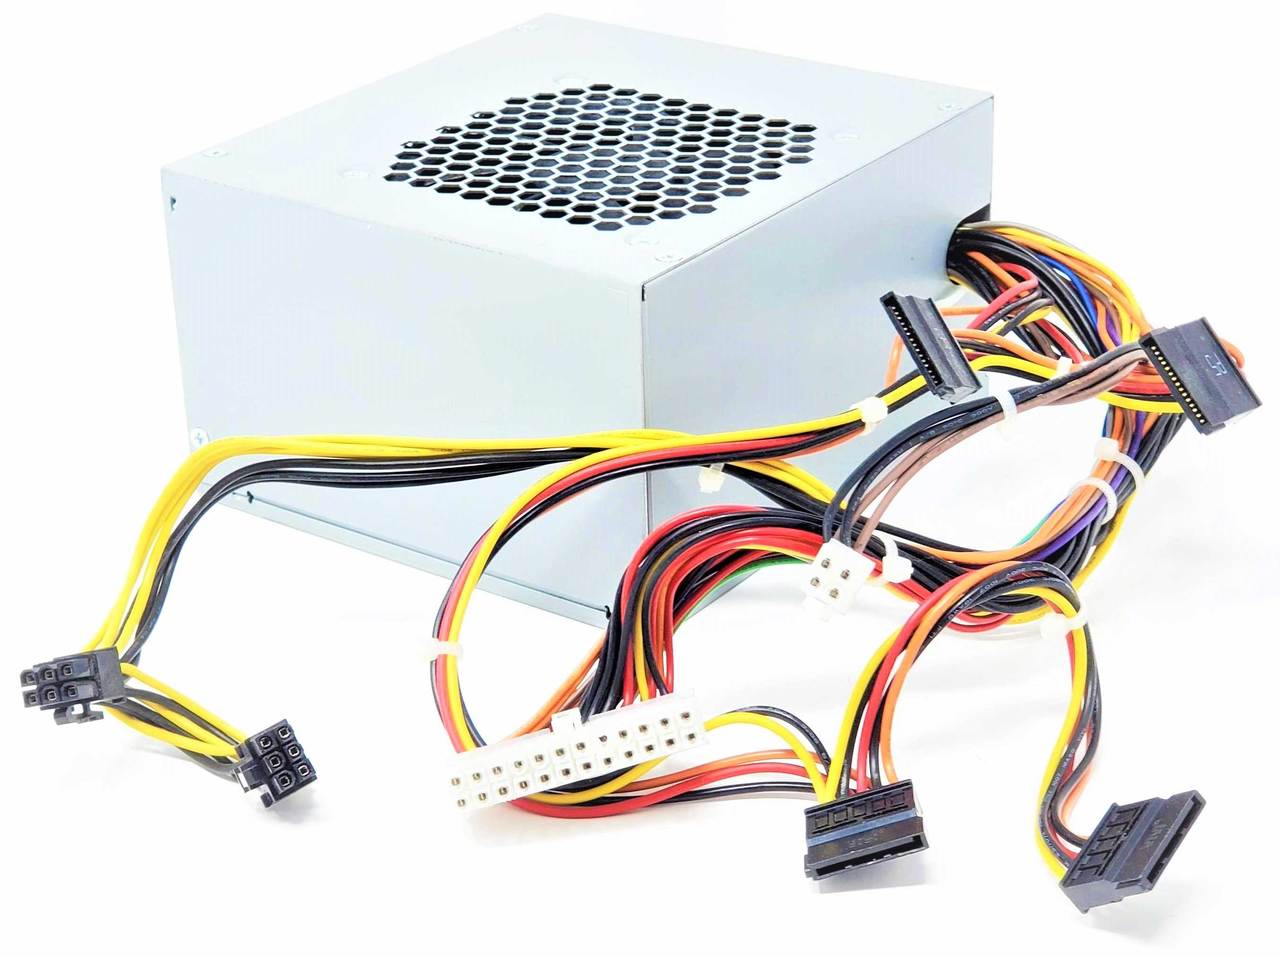 AC460AD-00 - 460W Power Supply for XPS 8300 8500 - CPU Medics